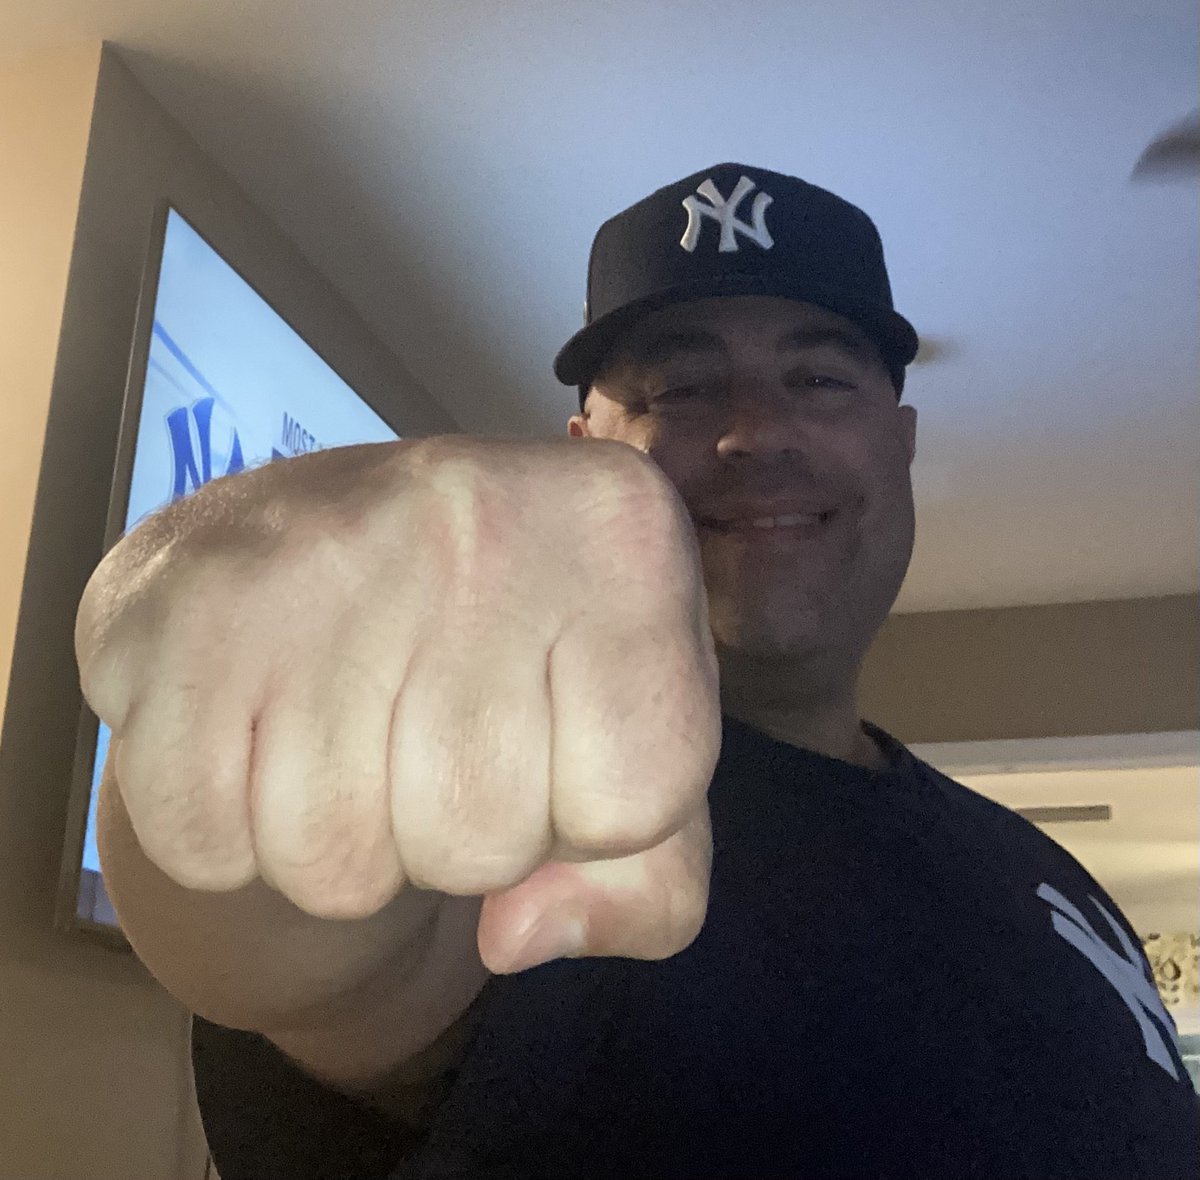 #NYYCapOfTheDay #YankeesTwitter #RepBx #September11th #TBvsNYY 
Yankees win!
extend their Division lead to 4 games, but because they own the tiebreaker against the Rays it’s really a 5 game lead.